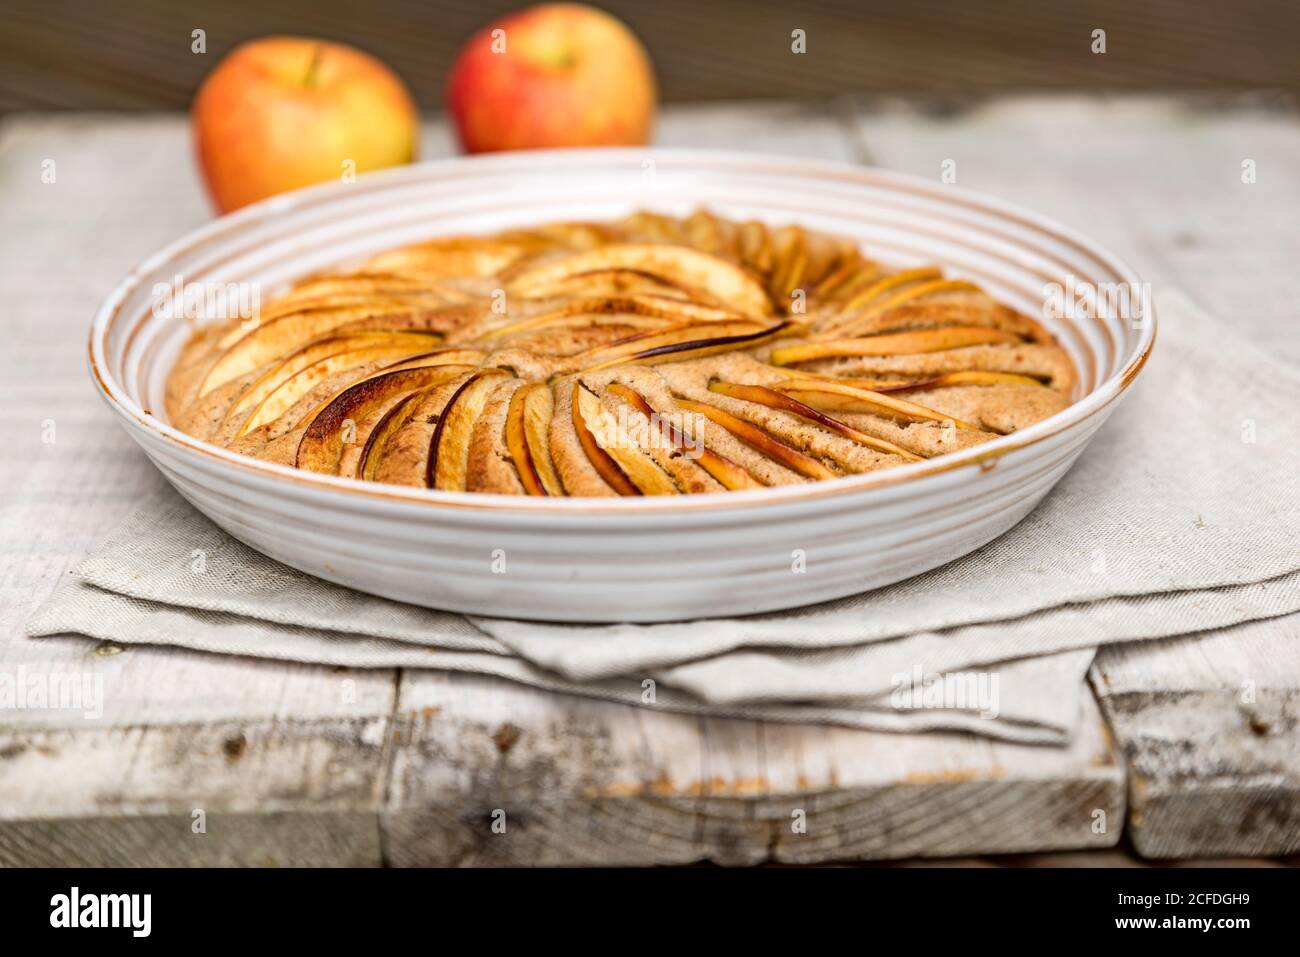 Apple pie baked in a round shape and decorated with apple slices, decorated with two apples Stock Photo